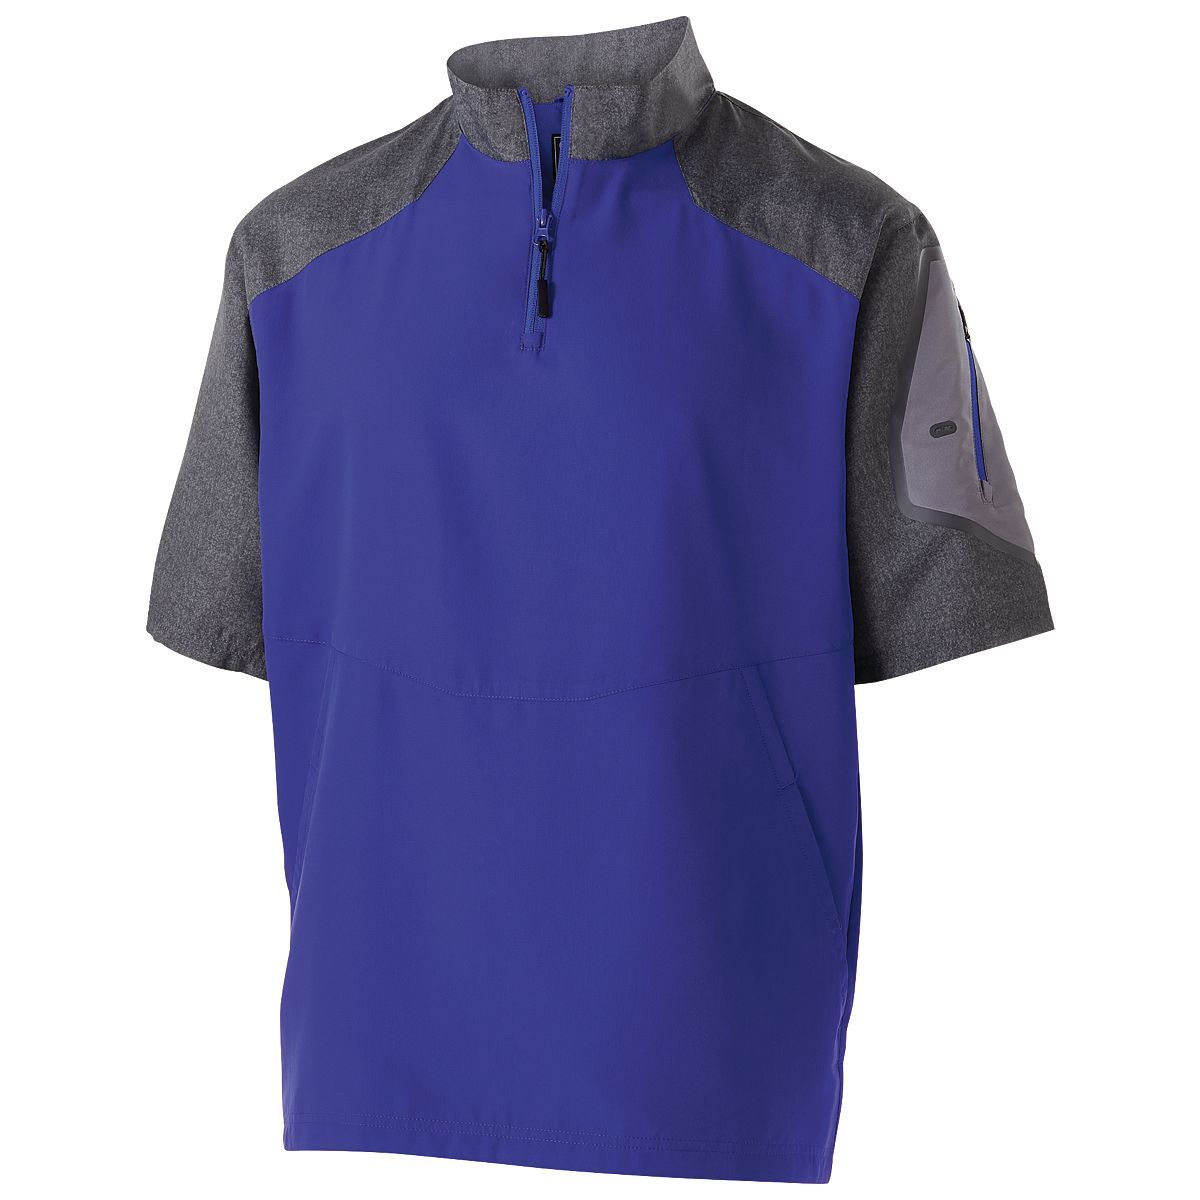 Holloway Raider  Short Sleeve Pullover in Carbon Print/Purple  -Part of the Adult, Adult-Pullover, Holloway, Outerwear product lines at KanaleyCreations.com